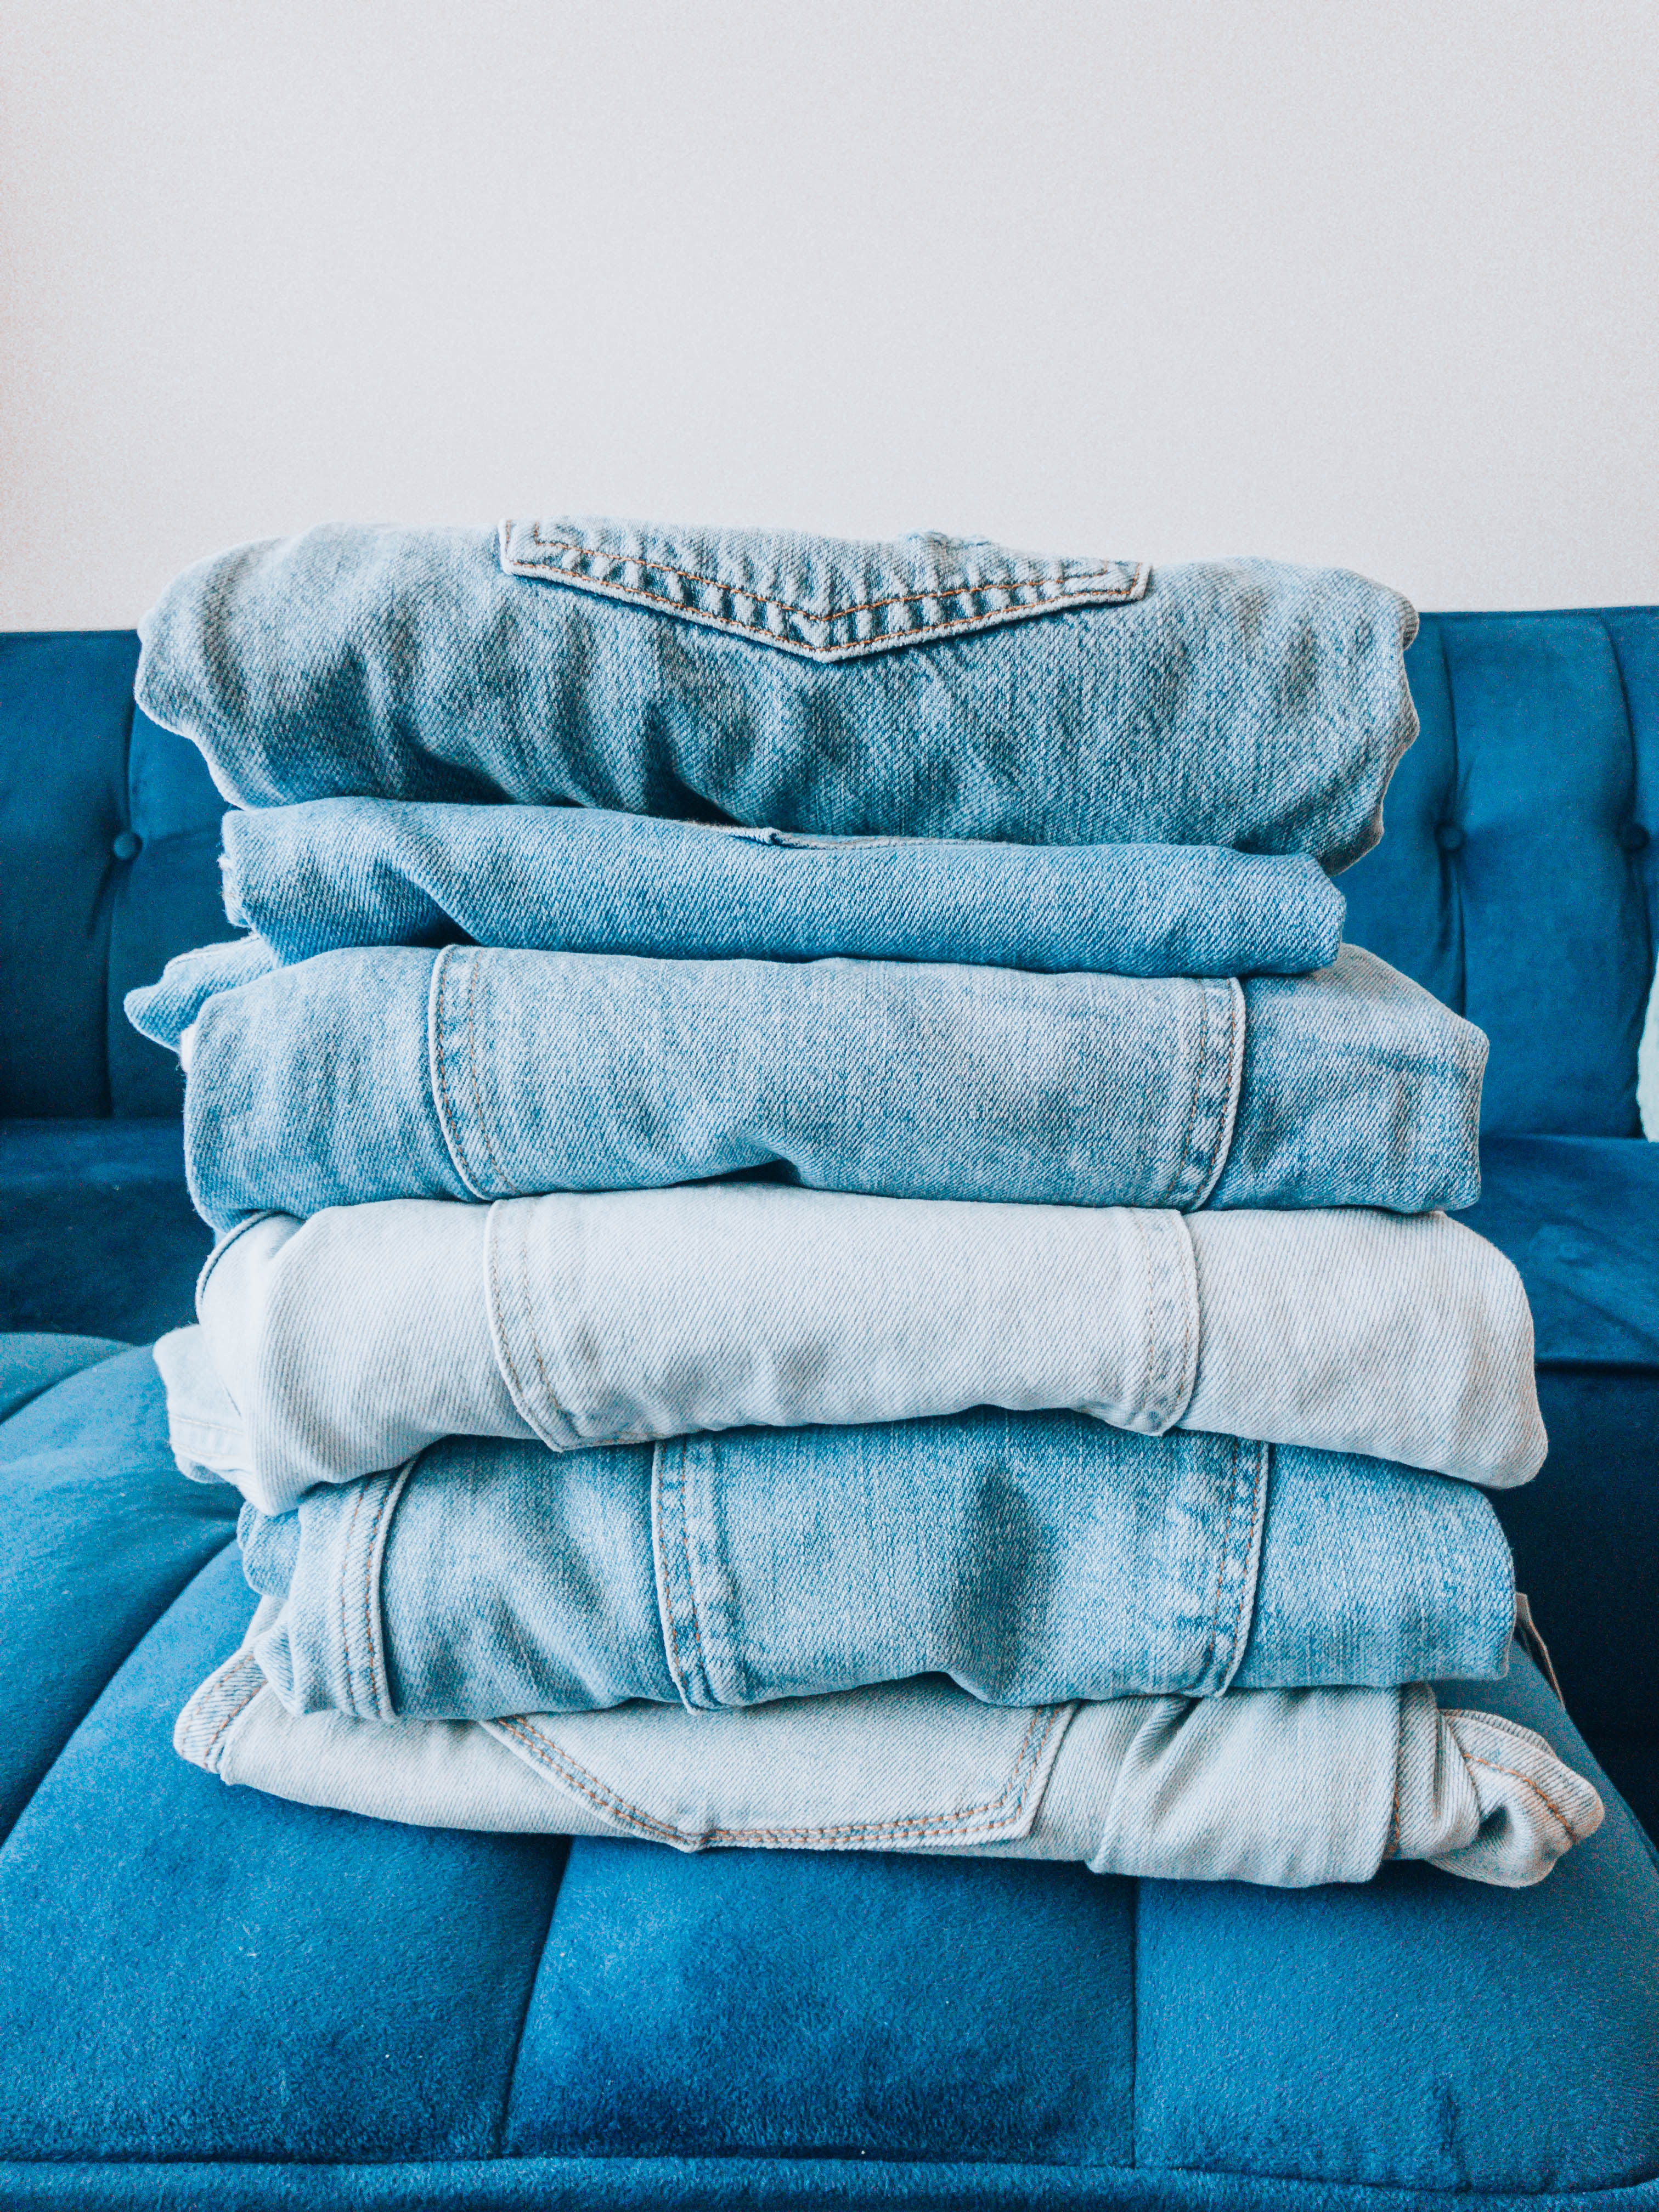 stack of blue denim jeans for Lauryncakes review on mom jeans